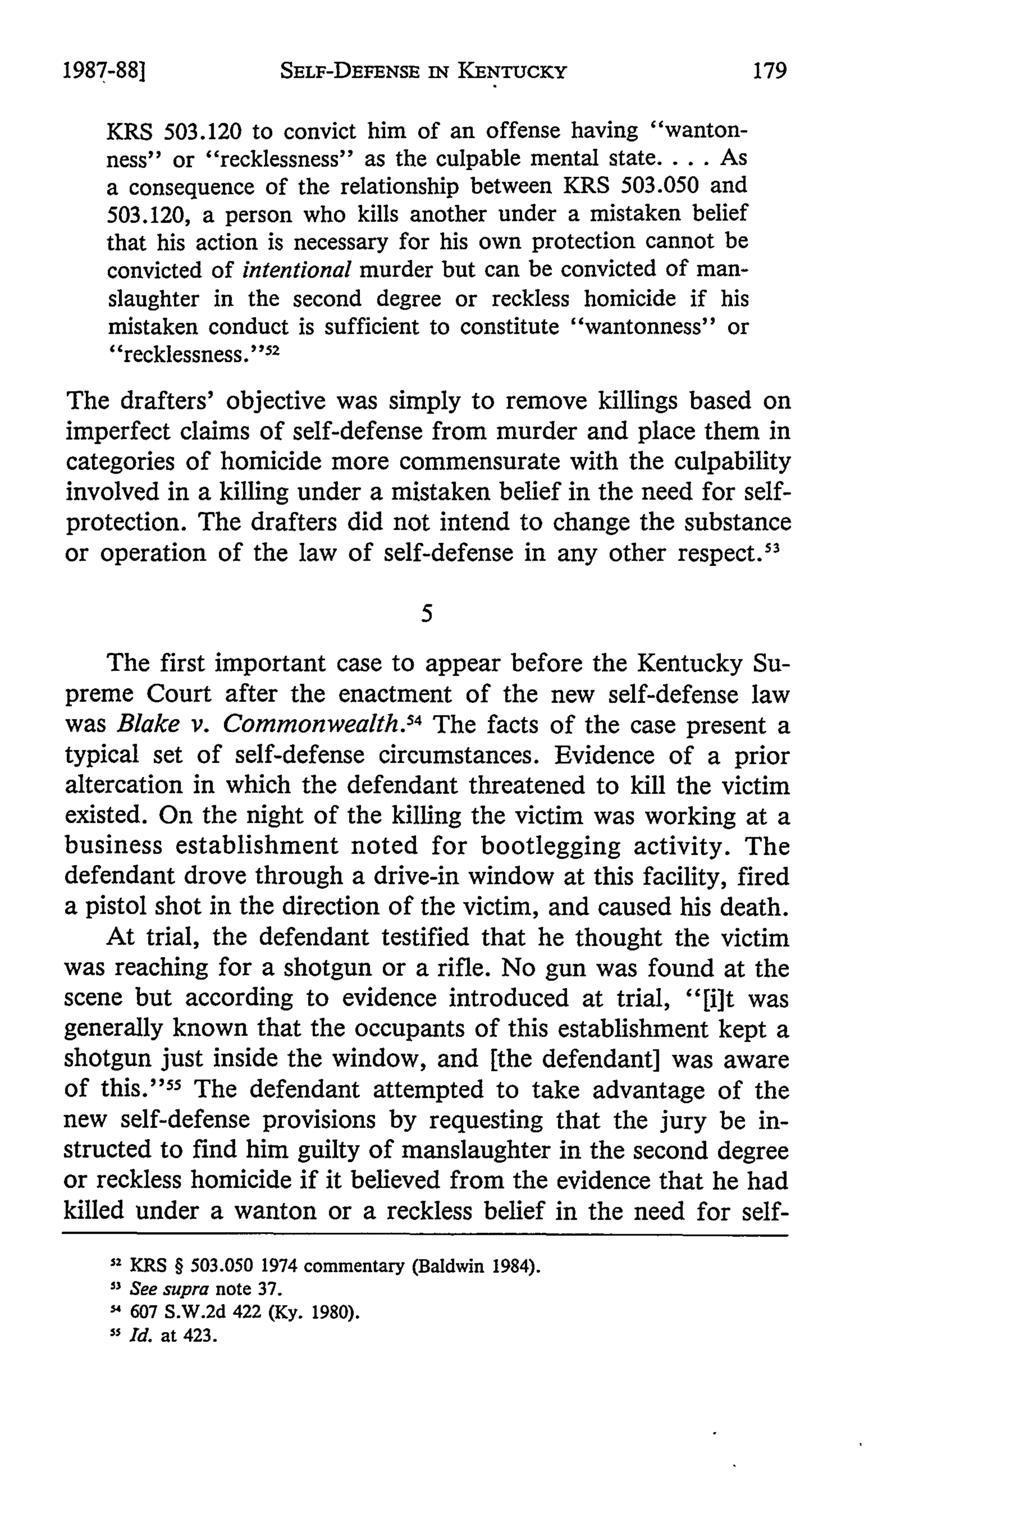 1987-88] SELF-DEFENSE IN KENTUCKY KRS 503.120 to convict him of an offense having "wantonness" or "recklessness" as the culpable mental state... As a consequence of the relationship between KRS 503.